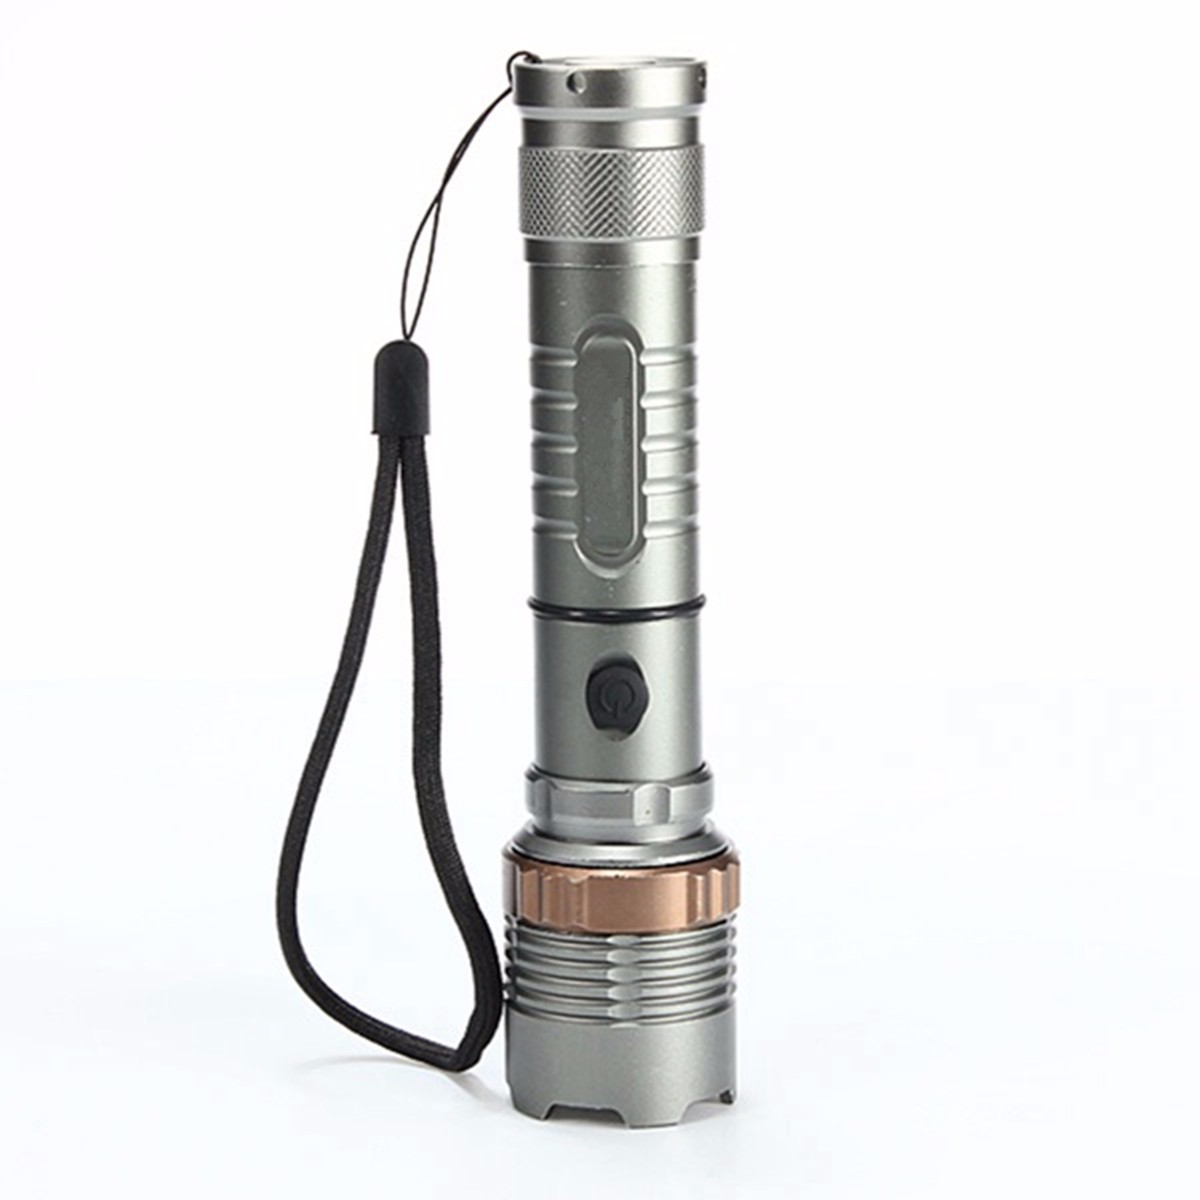 2600LM-T6-LED-Flashlight-Zoomable-5Modes-18650-Torch-Super-Bright-Torch-Lamp-For-Camping-Hiking-Cycl-1934827-10